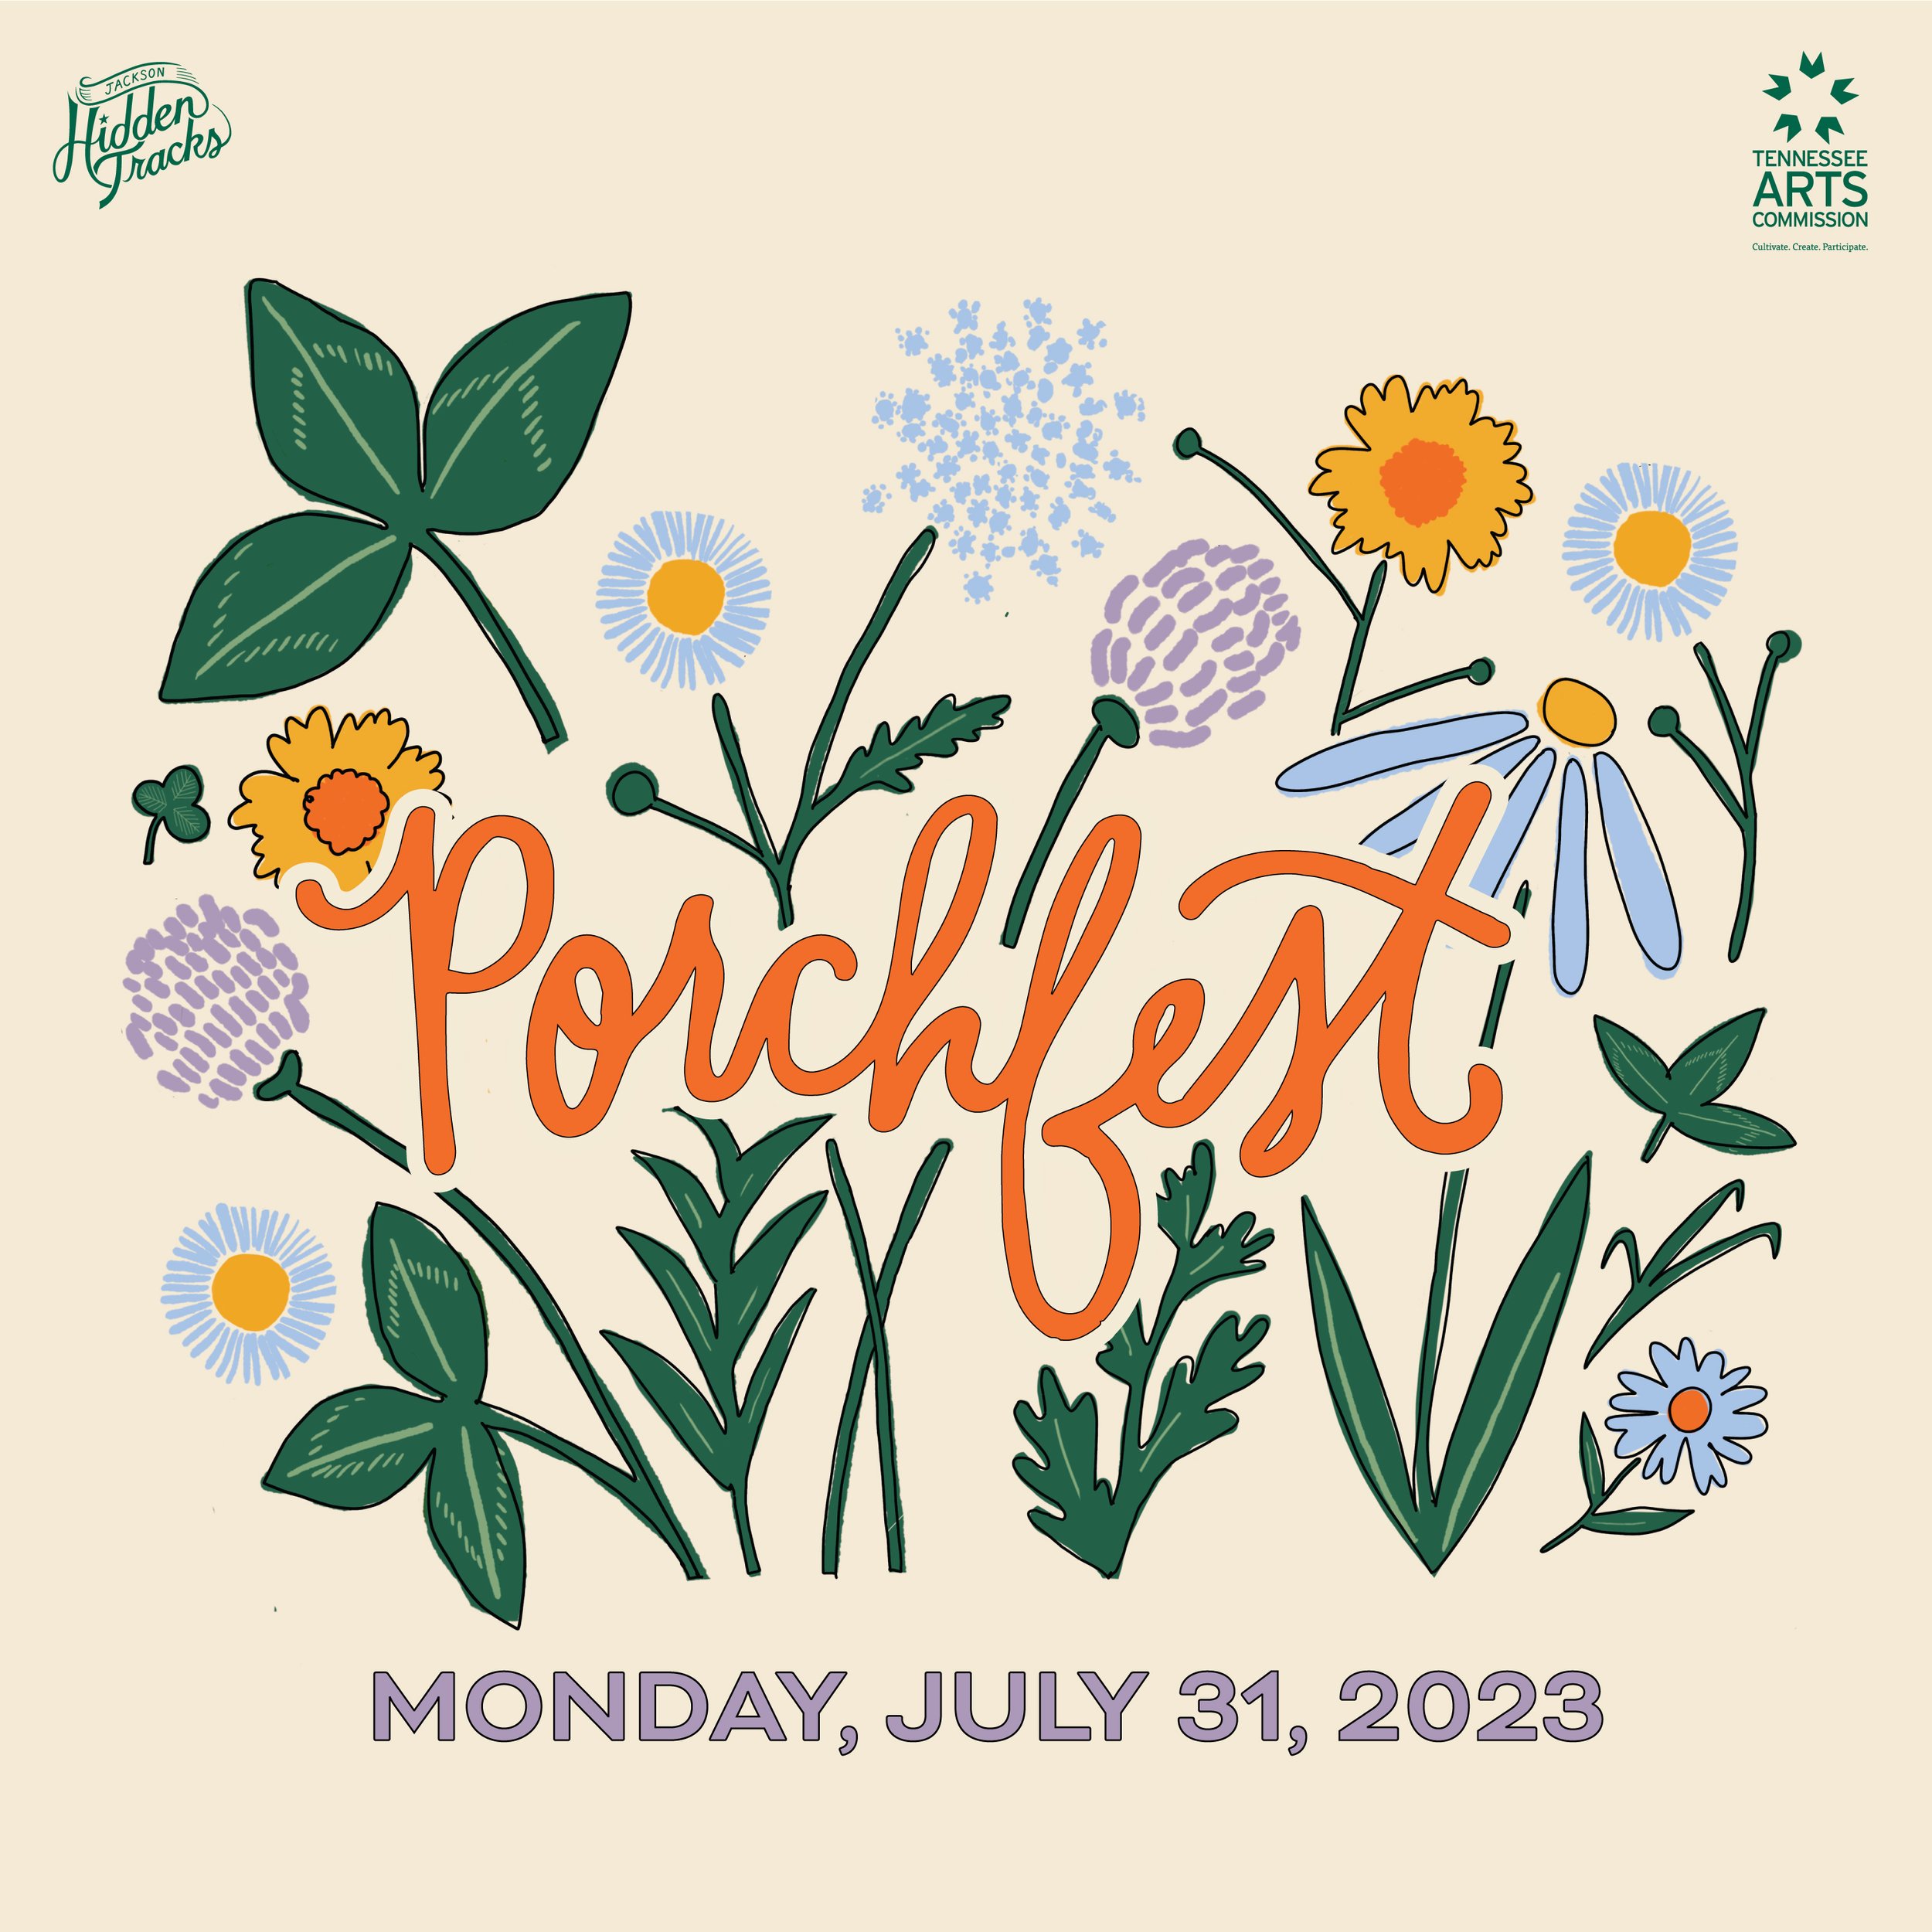 Porchfest 2023 schedule — Our Jackson Home